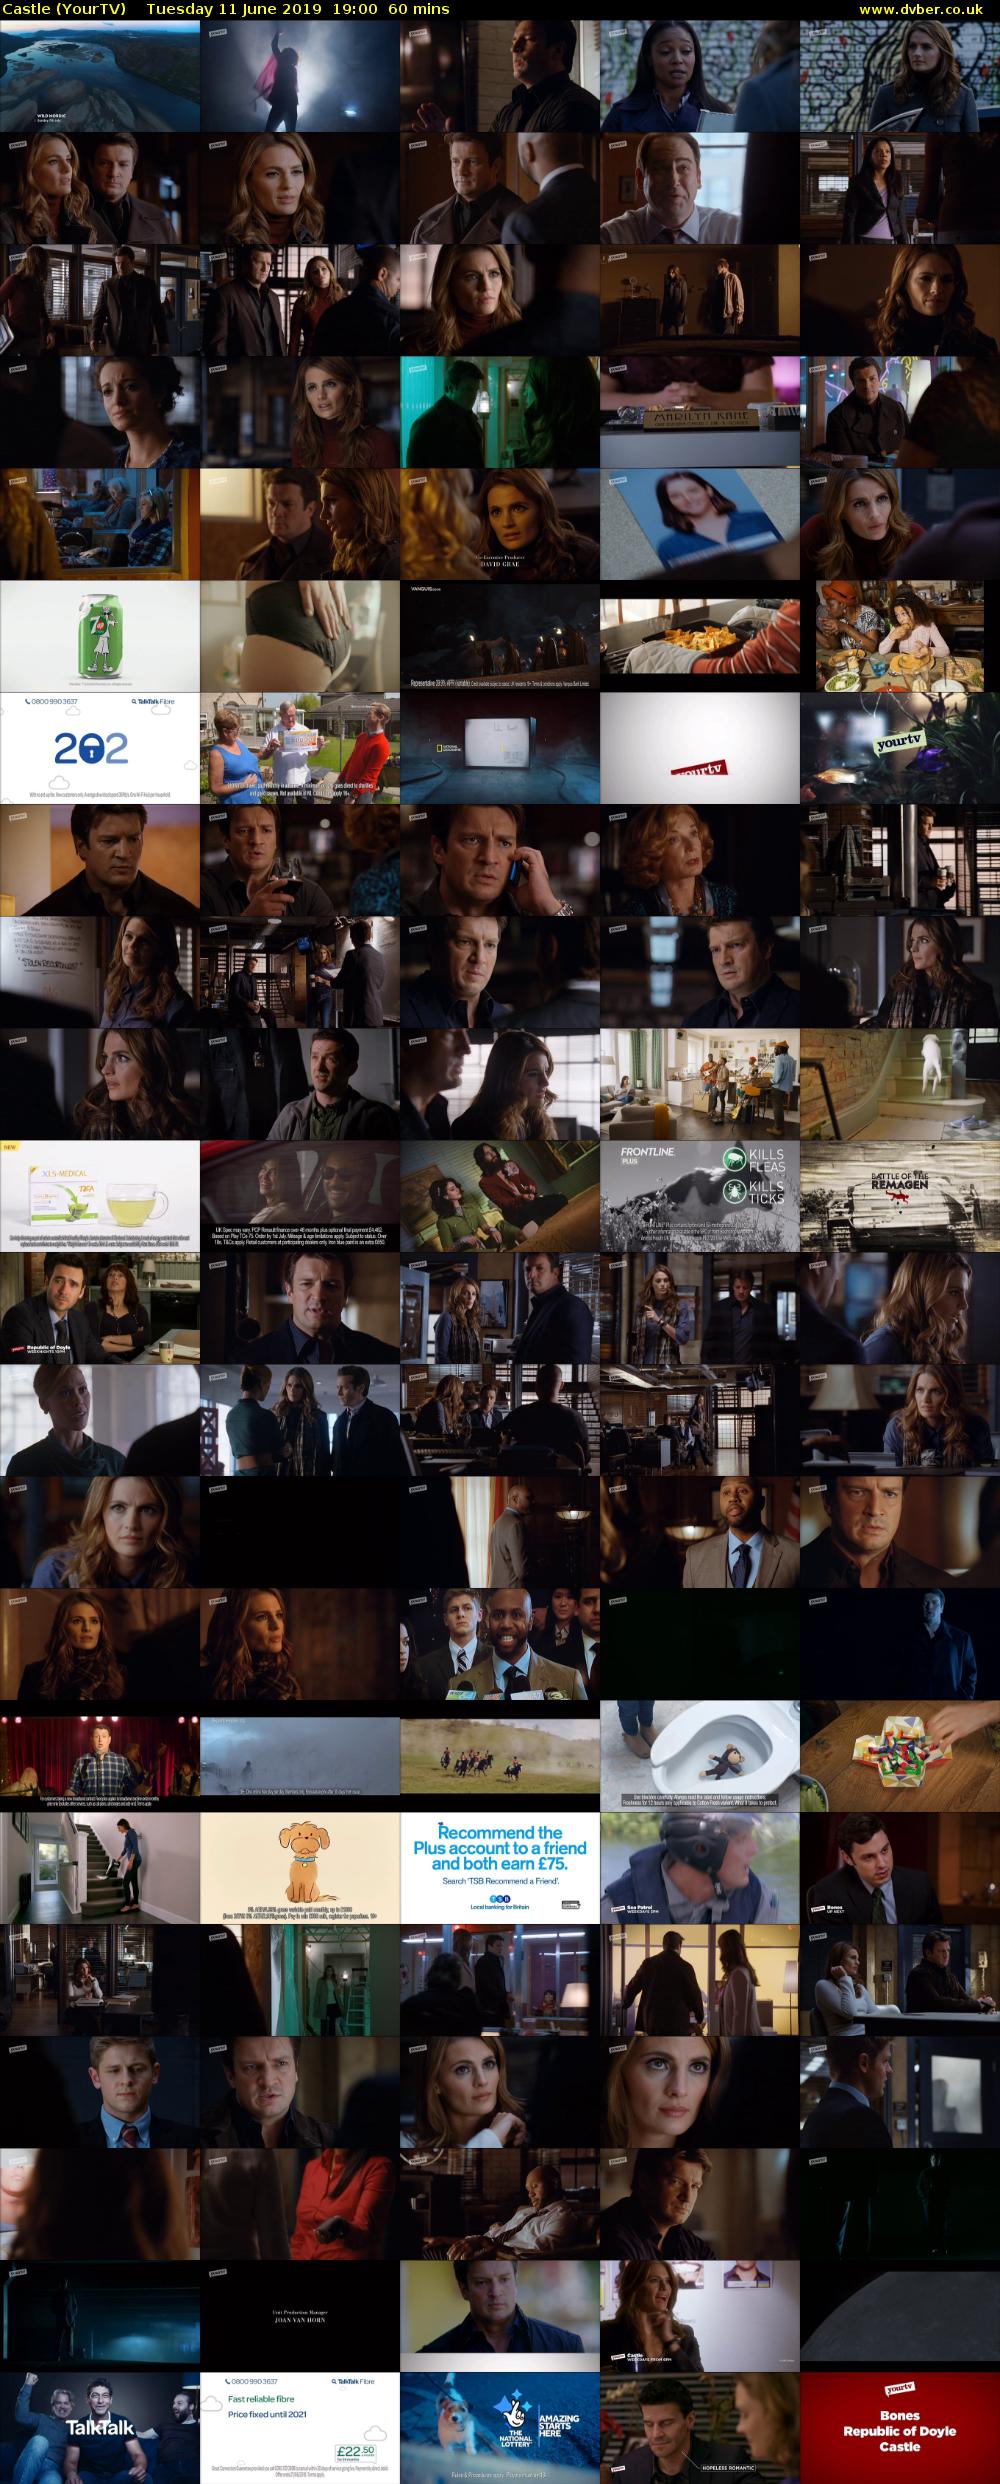 Castle (YourTV) Tuesday 11 June 2019 19:00 - 20:00